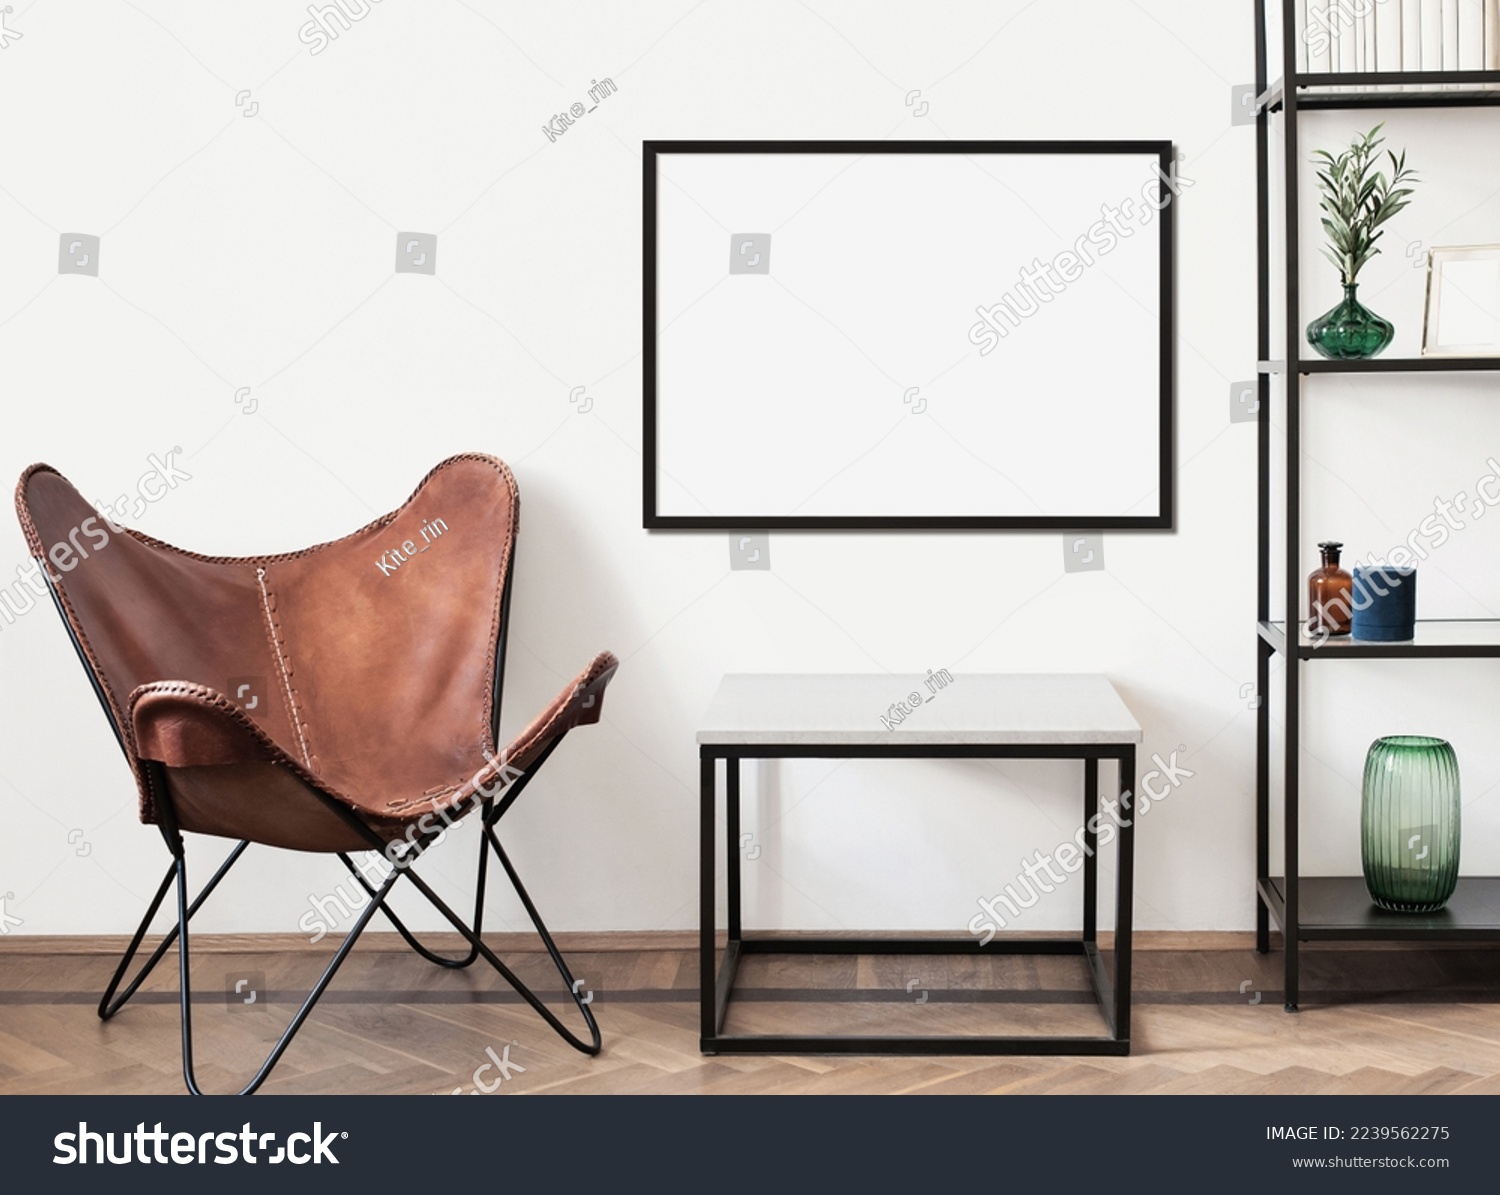 Blank picture frame mockup on a wall. Horizontal orientation. Artwork template in interior design #2239562275